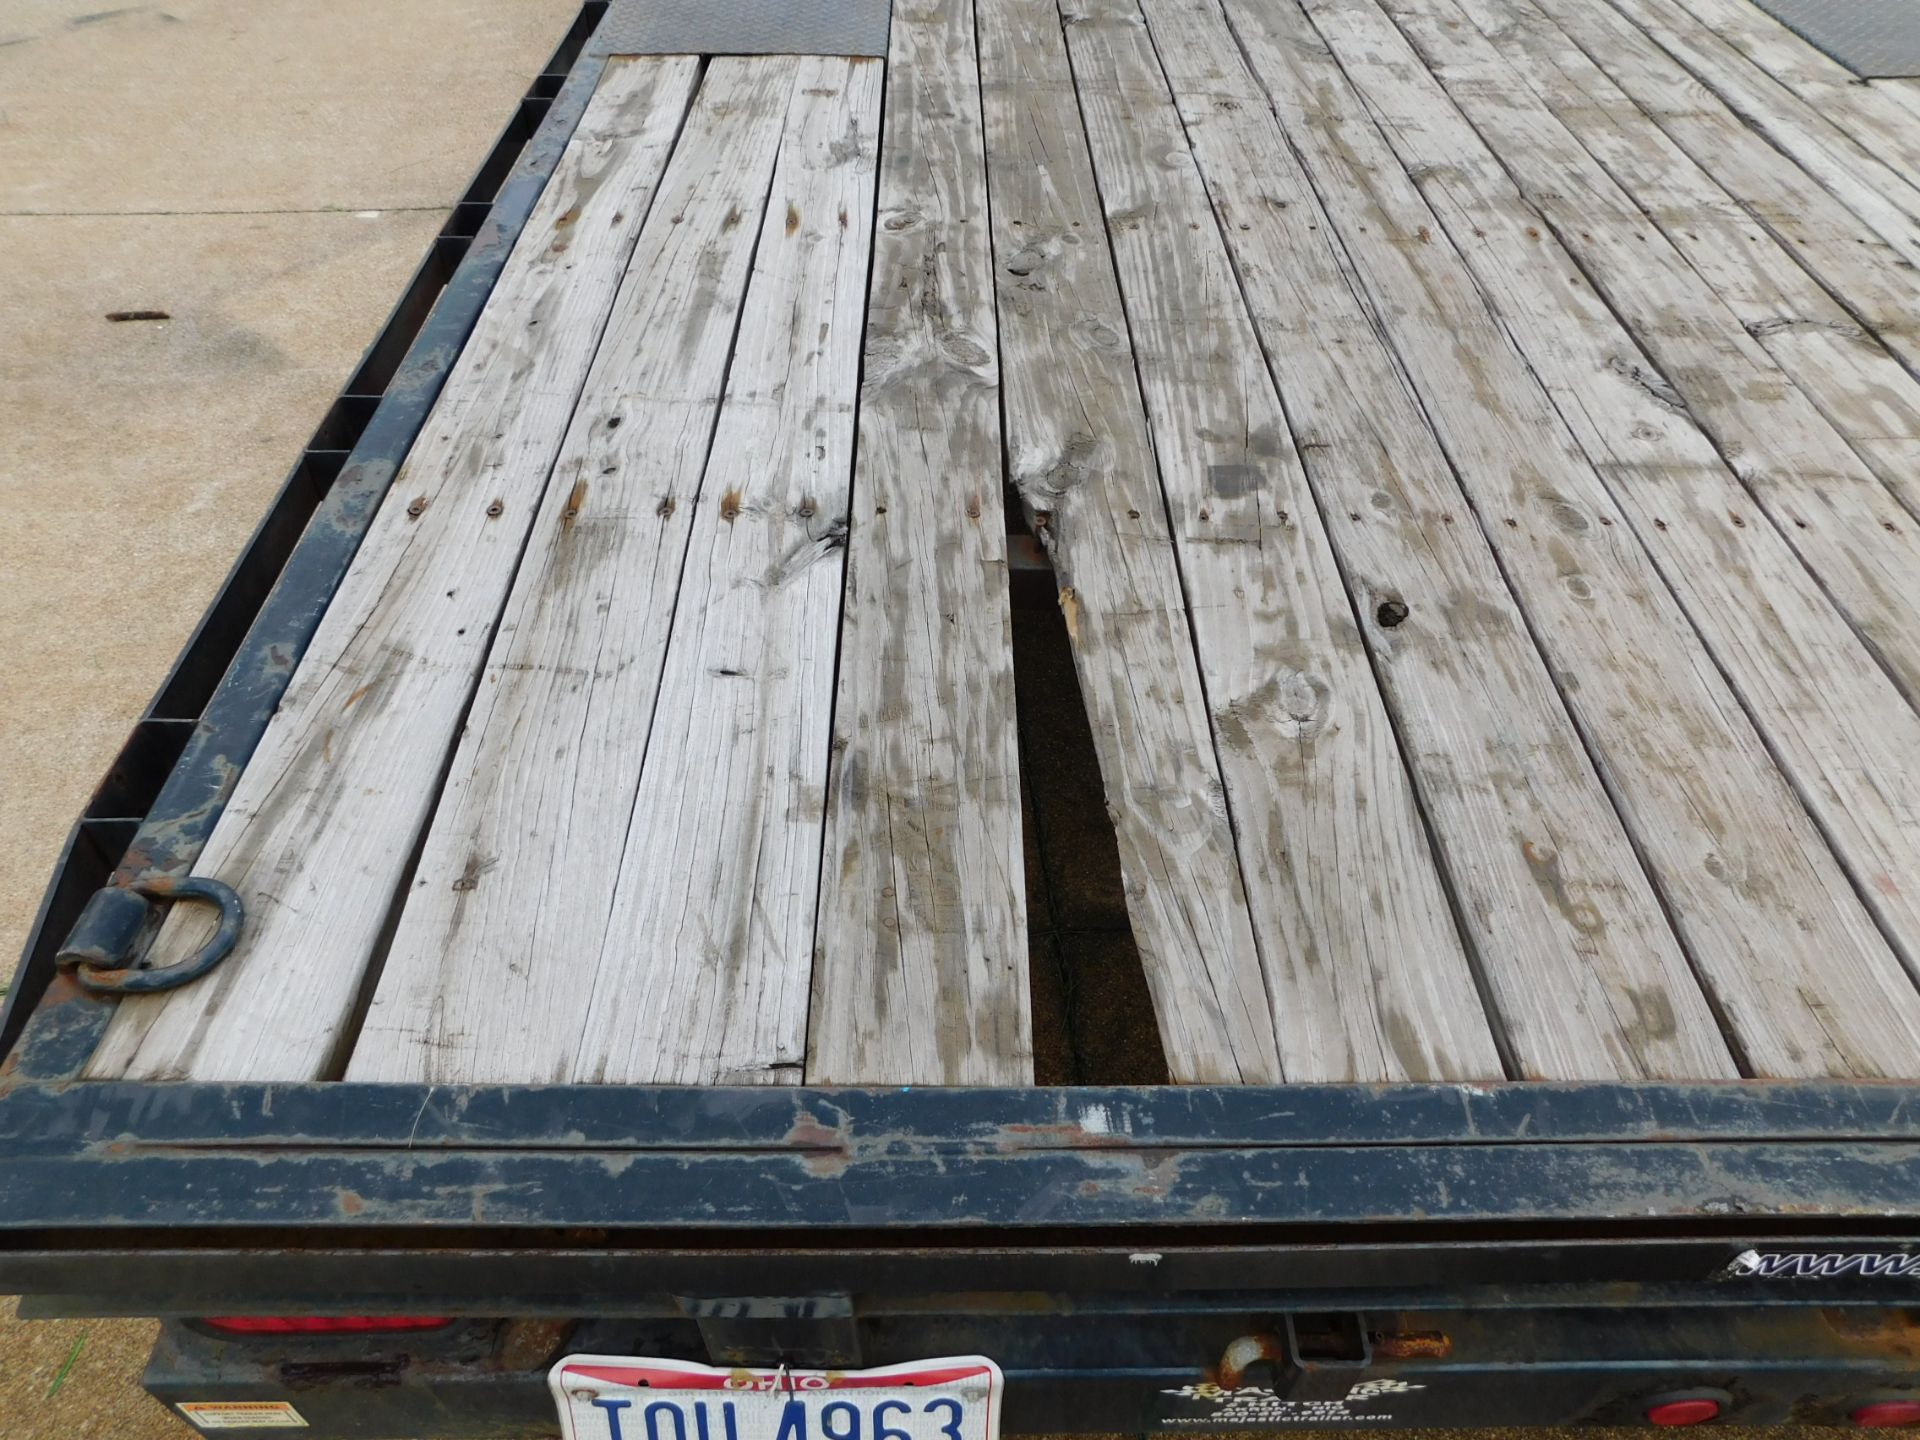 Sure-Trac Tandem Axle 20' Deck Over Trailer, Wood Deck, 102" Wide, D-Rings and Chain Rail - Image 9 of 15